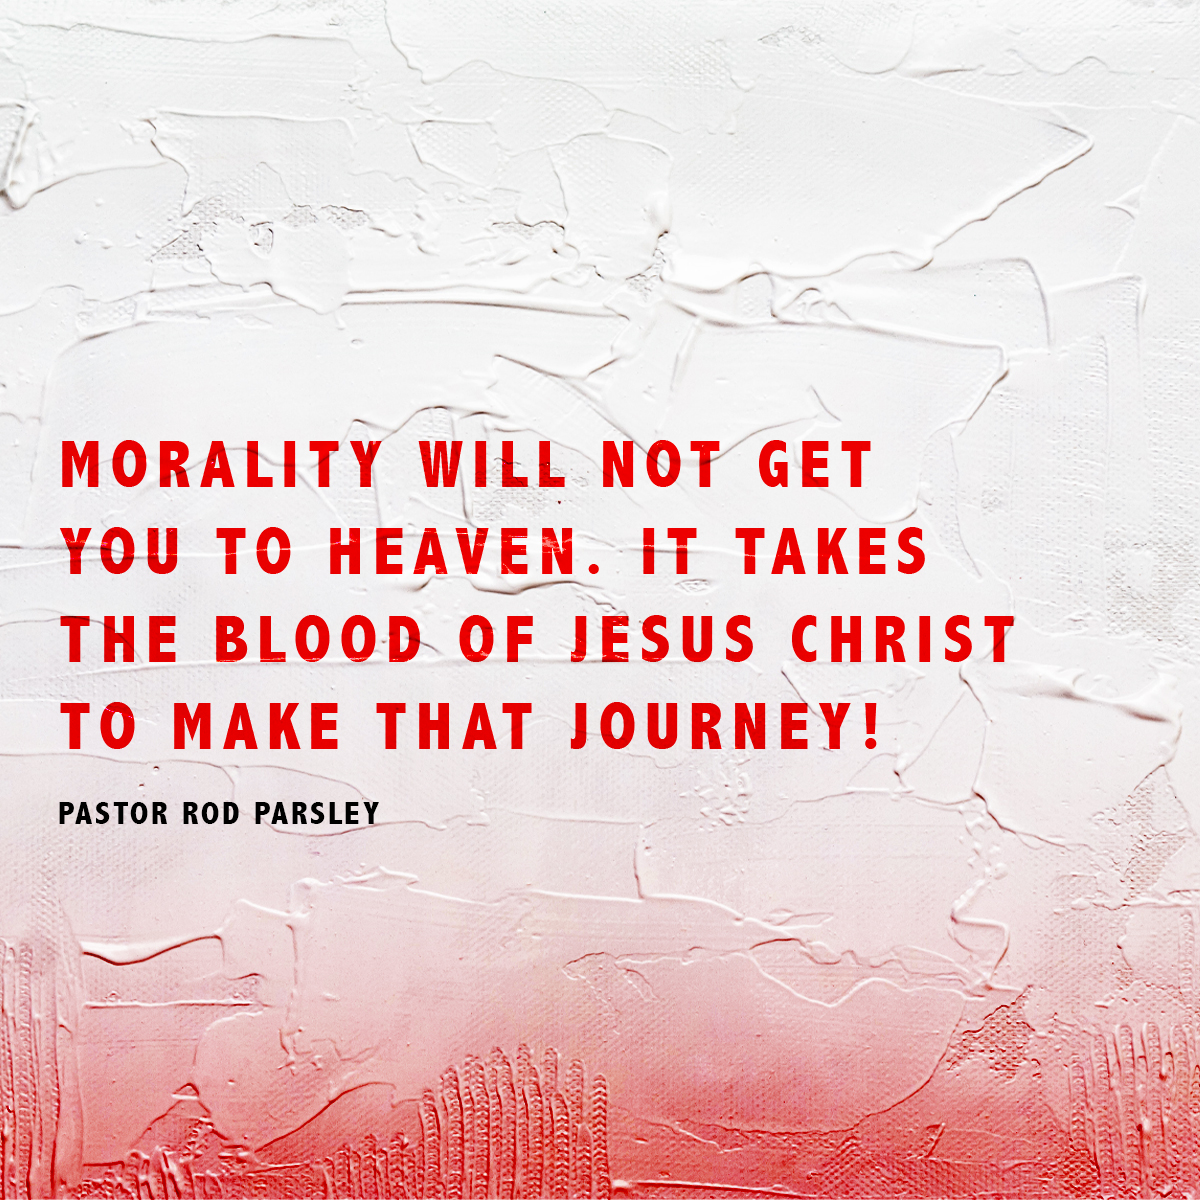 “Morality will not get you to Heaven. It takes the blood of Jesus Christ to make that journey!” – Pastor Rod Parsley